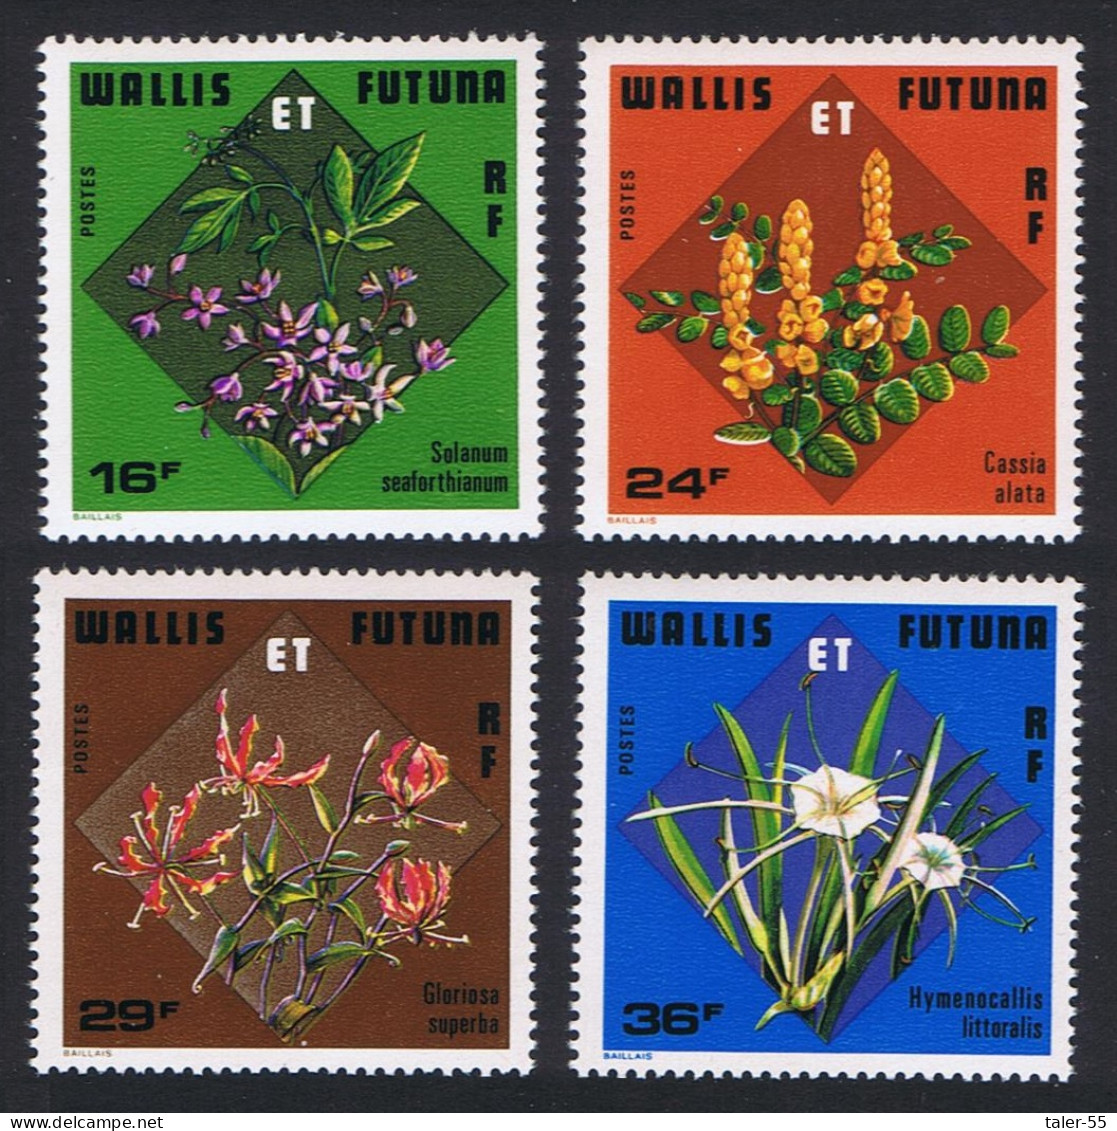 Wallis And Futuna Tropical Flowers 4v 1978 MNH SG#290-293 Sc#210-213 - Unused Stamps